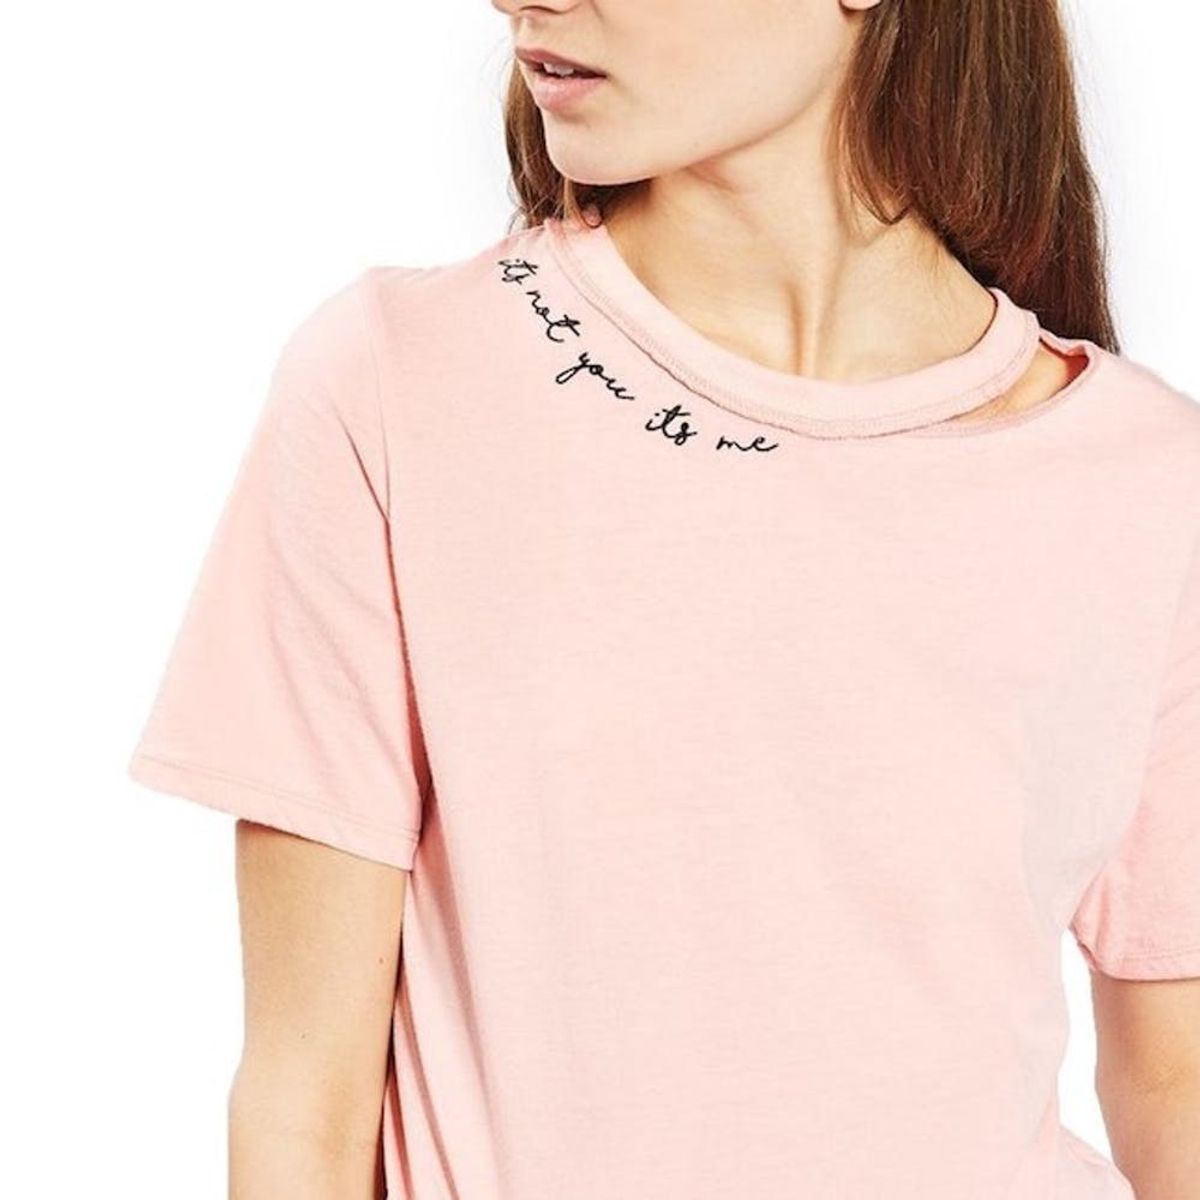 This Topshop Pink T-Shirt’s Typo Is Driving Us Nuts